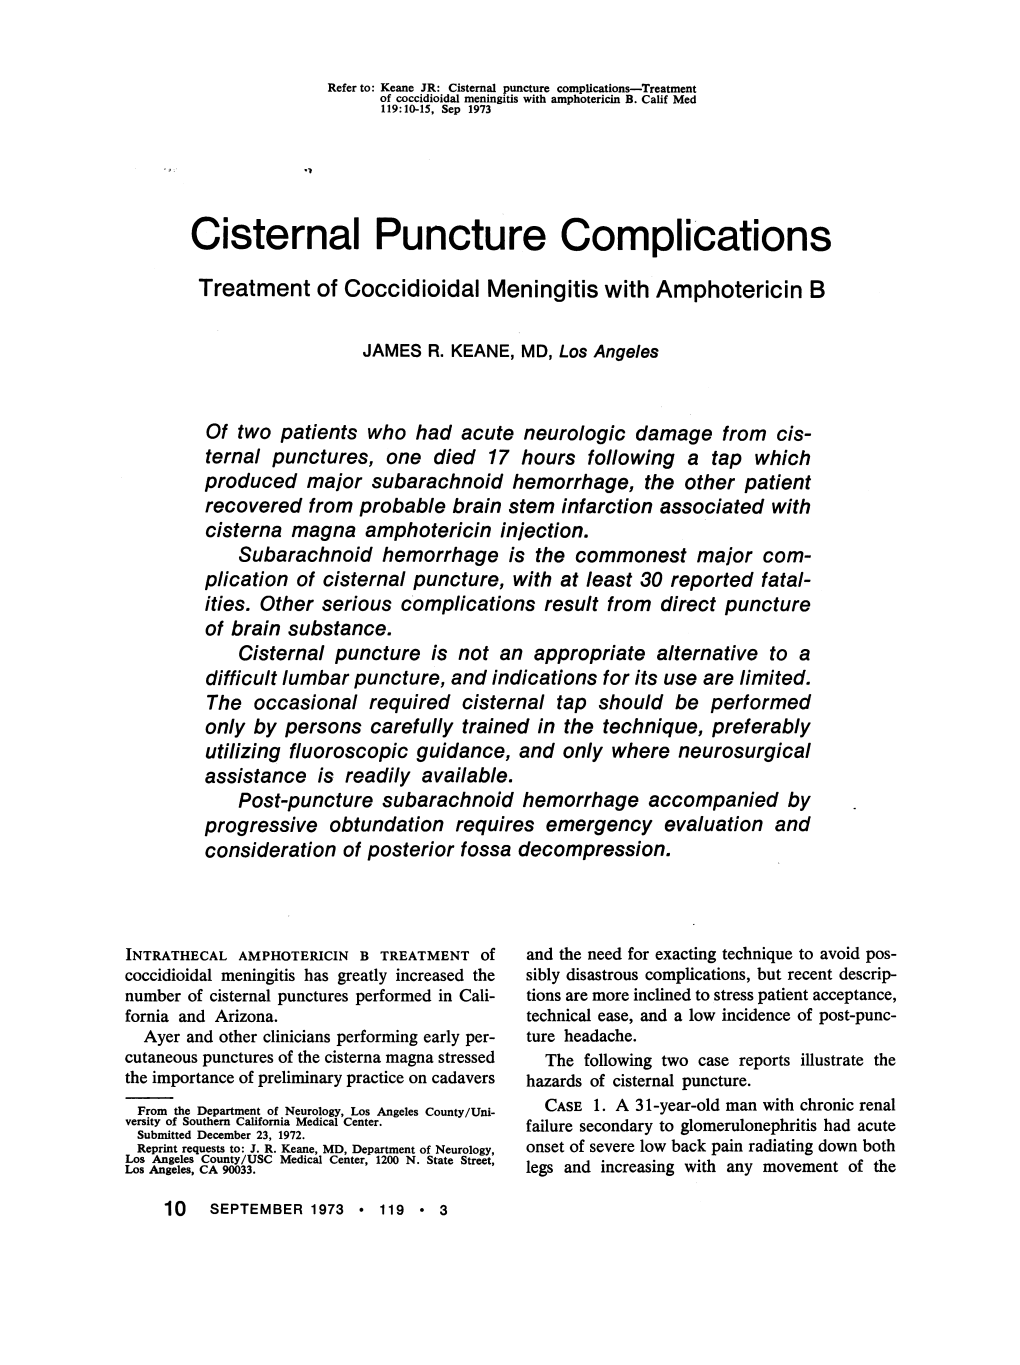 Cisternal Puncture Complications-Treatment of Coccidioidal Meningitis with Amphotericin B